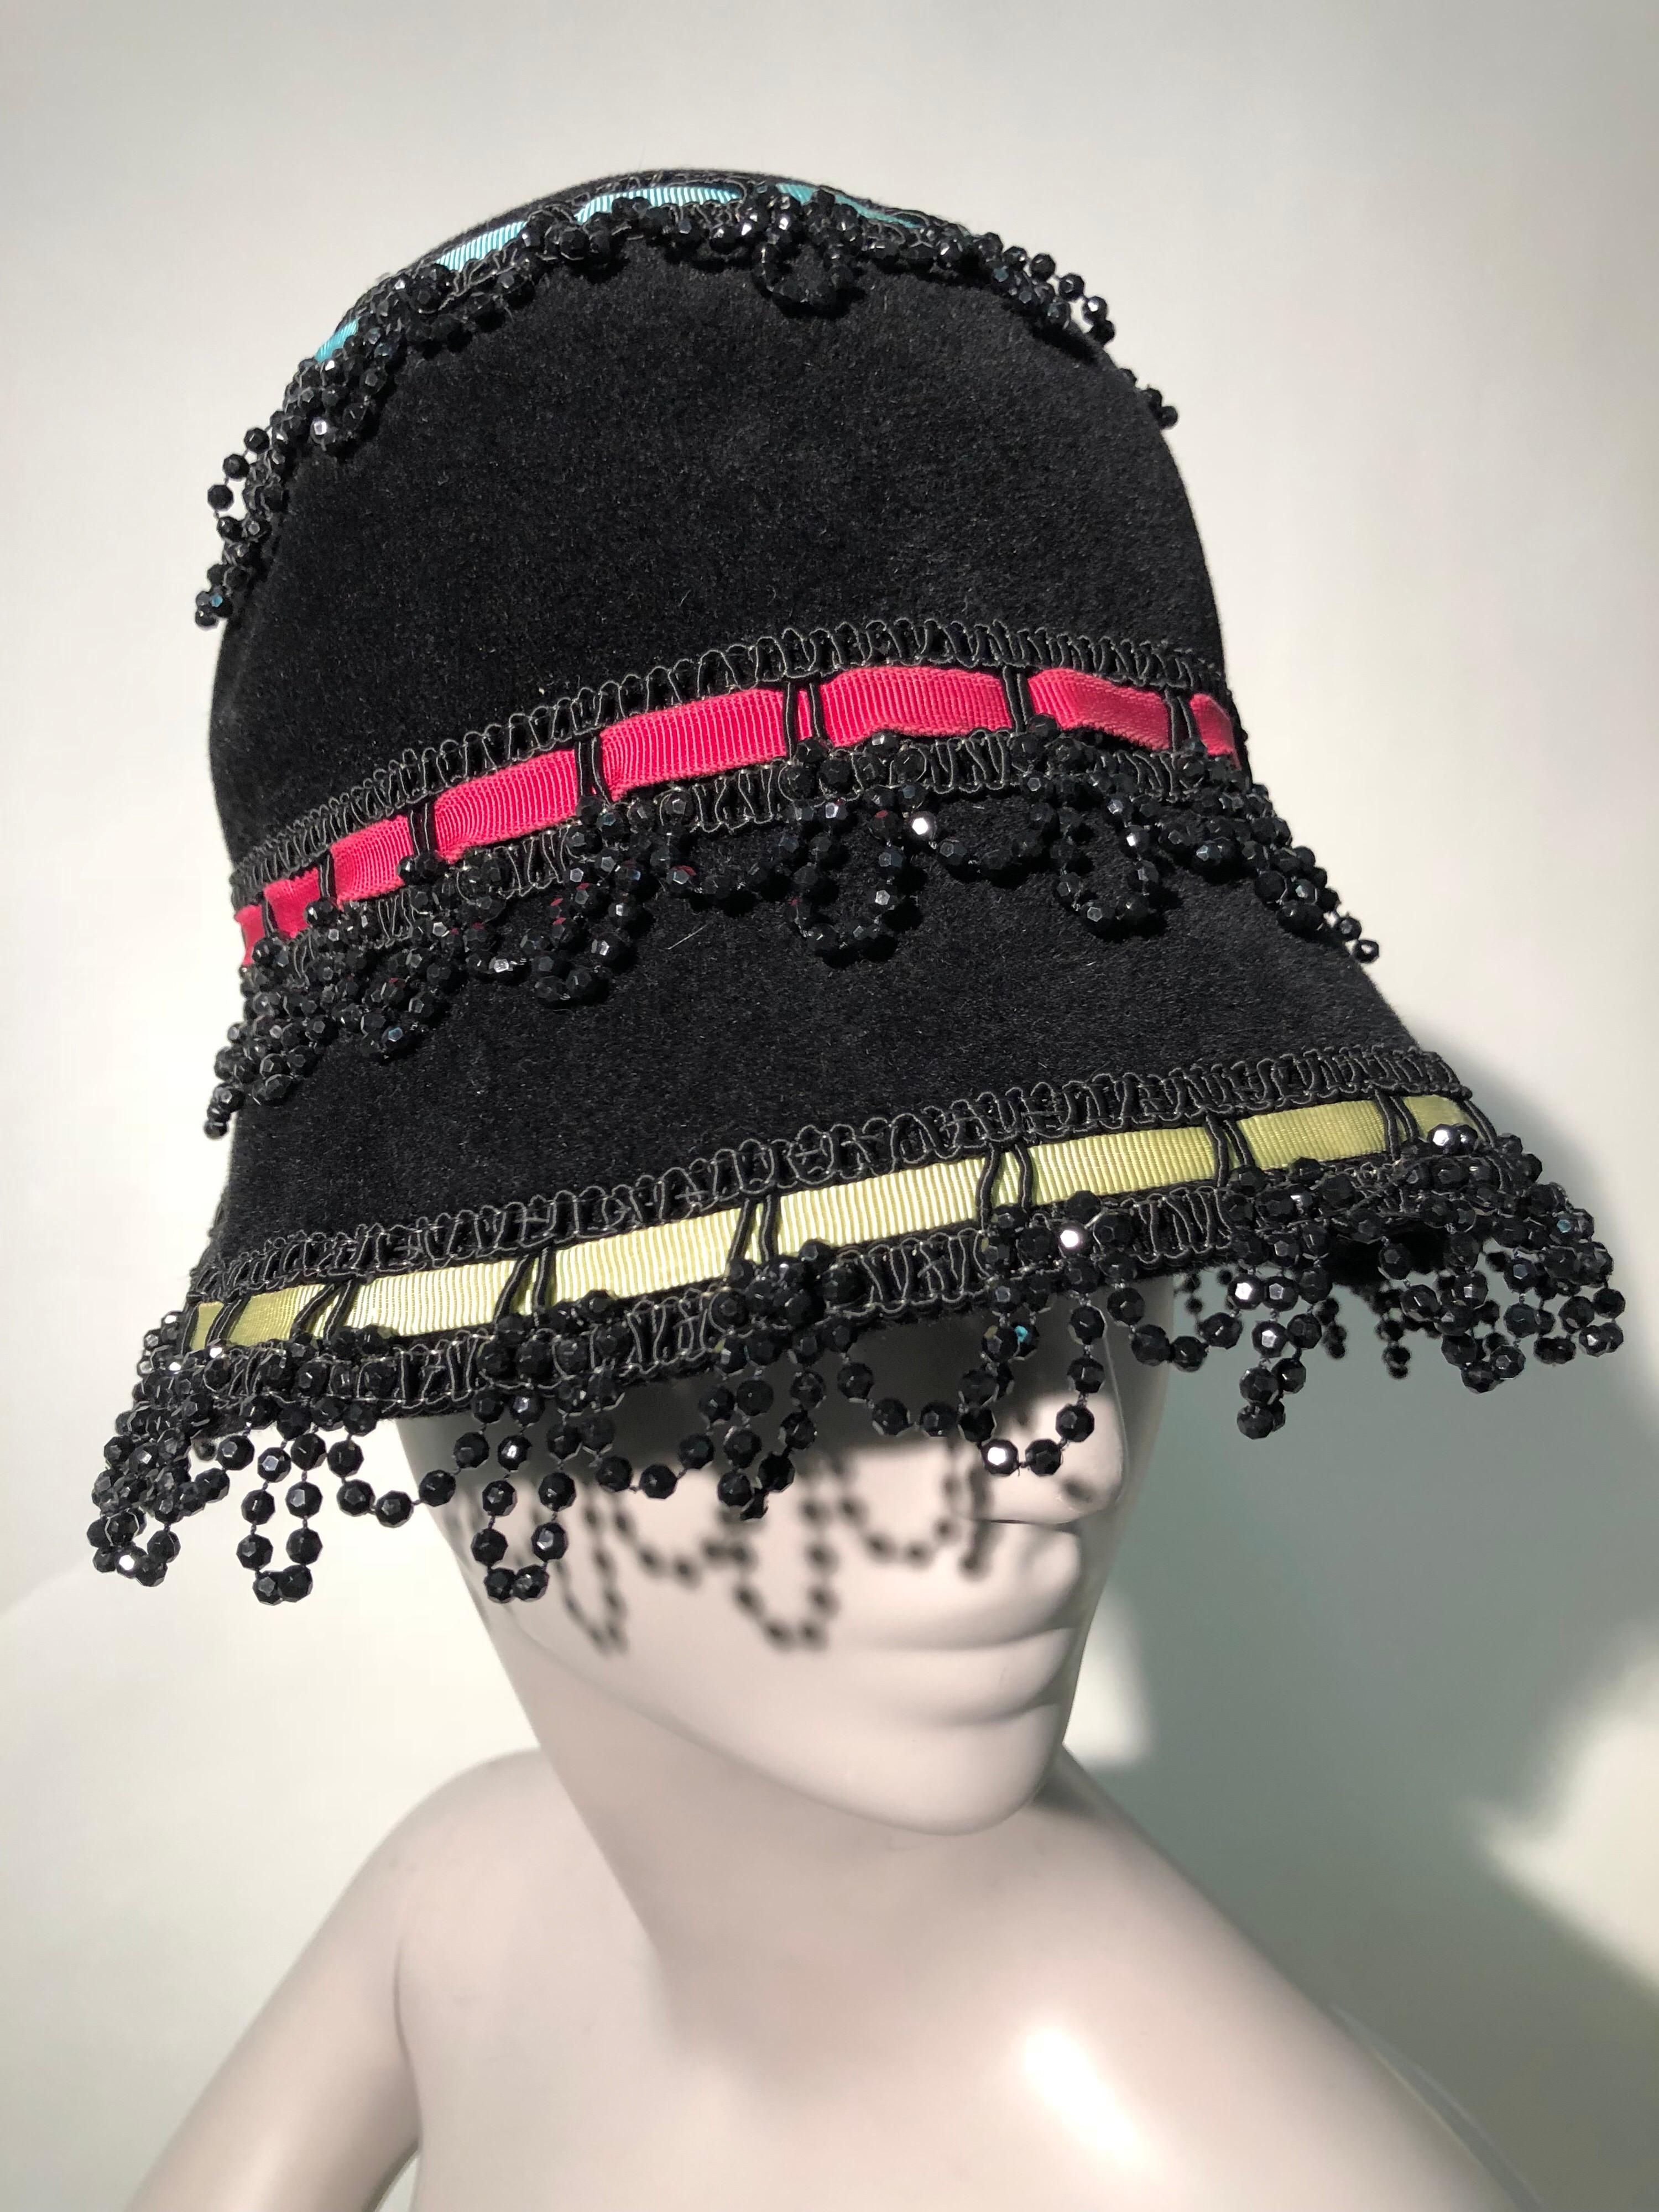 Yves Saint Laurent Black Felt Bucket Hat With Color Ribbons and Bead Trim, 1960s 1